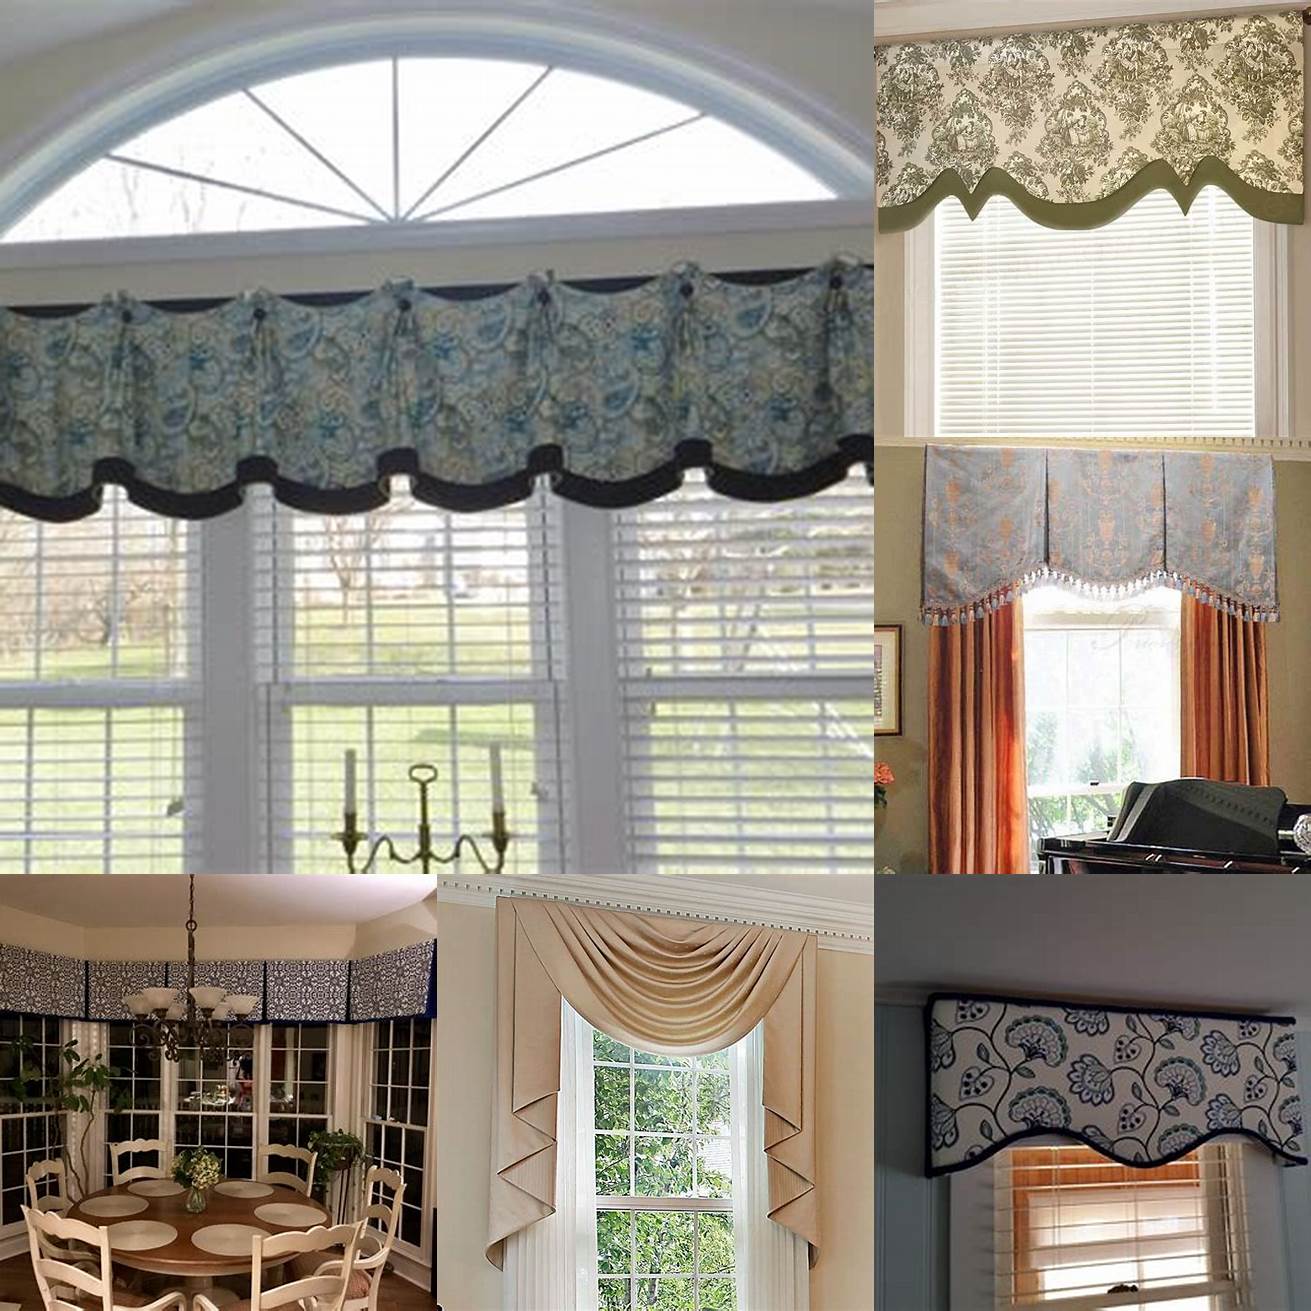 Tailored valance with contrasting piping